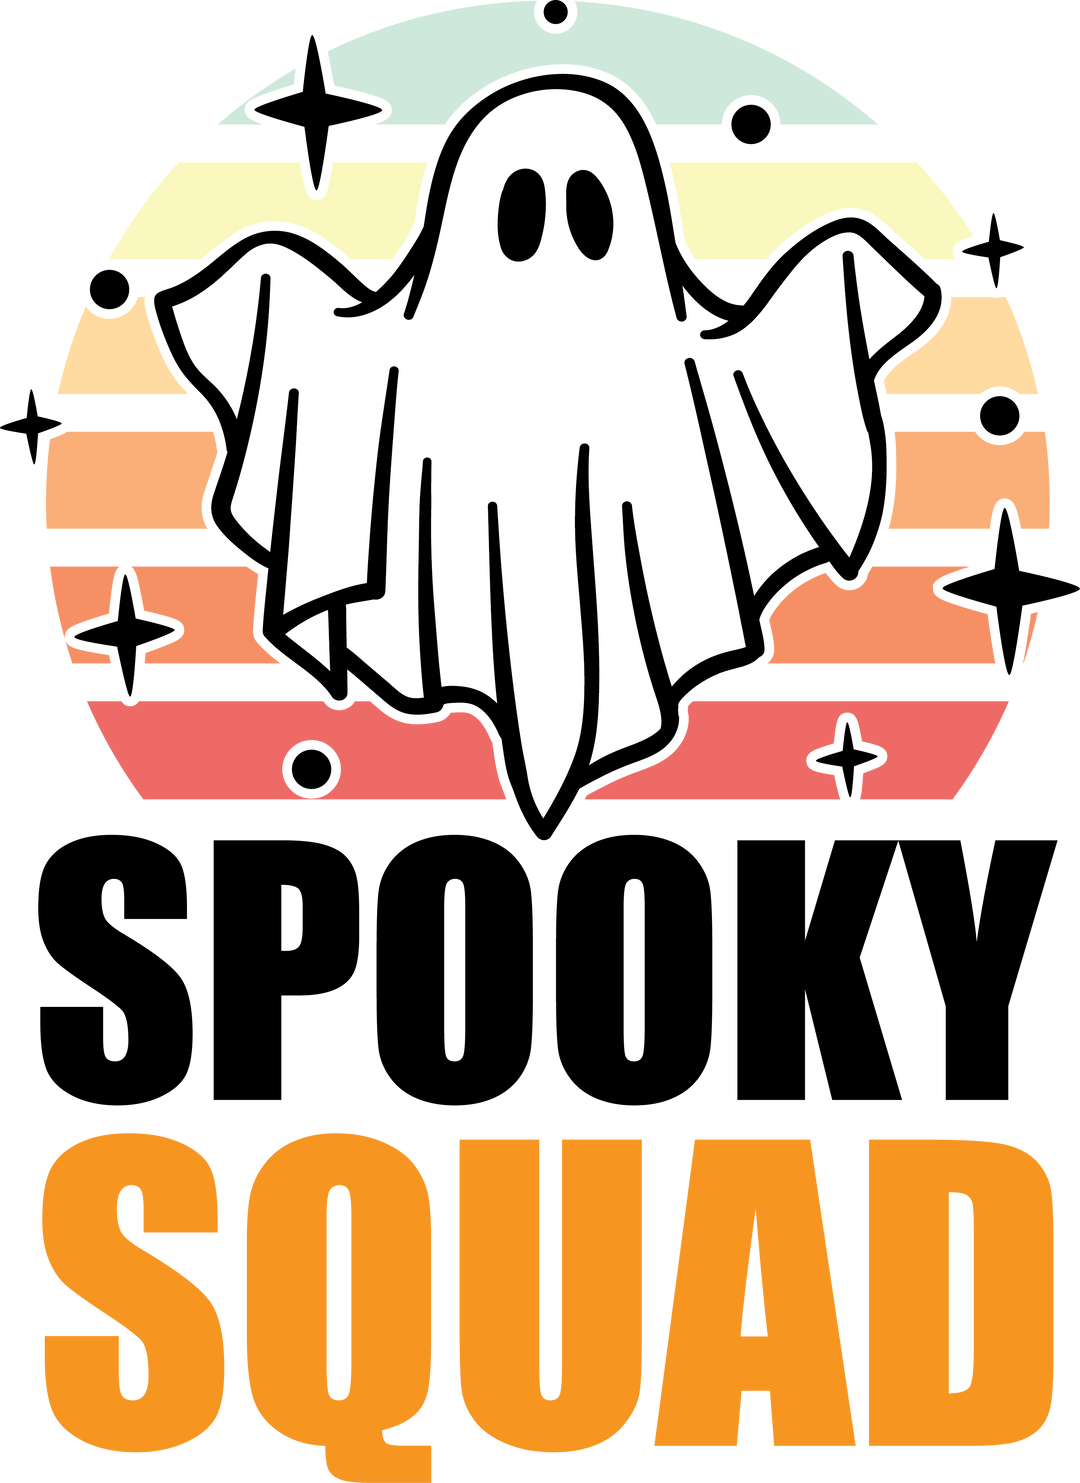 Spooky Squad Tee 18561111630321215031 24 T-Shirt Worlds Worst Tees